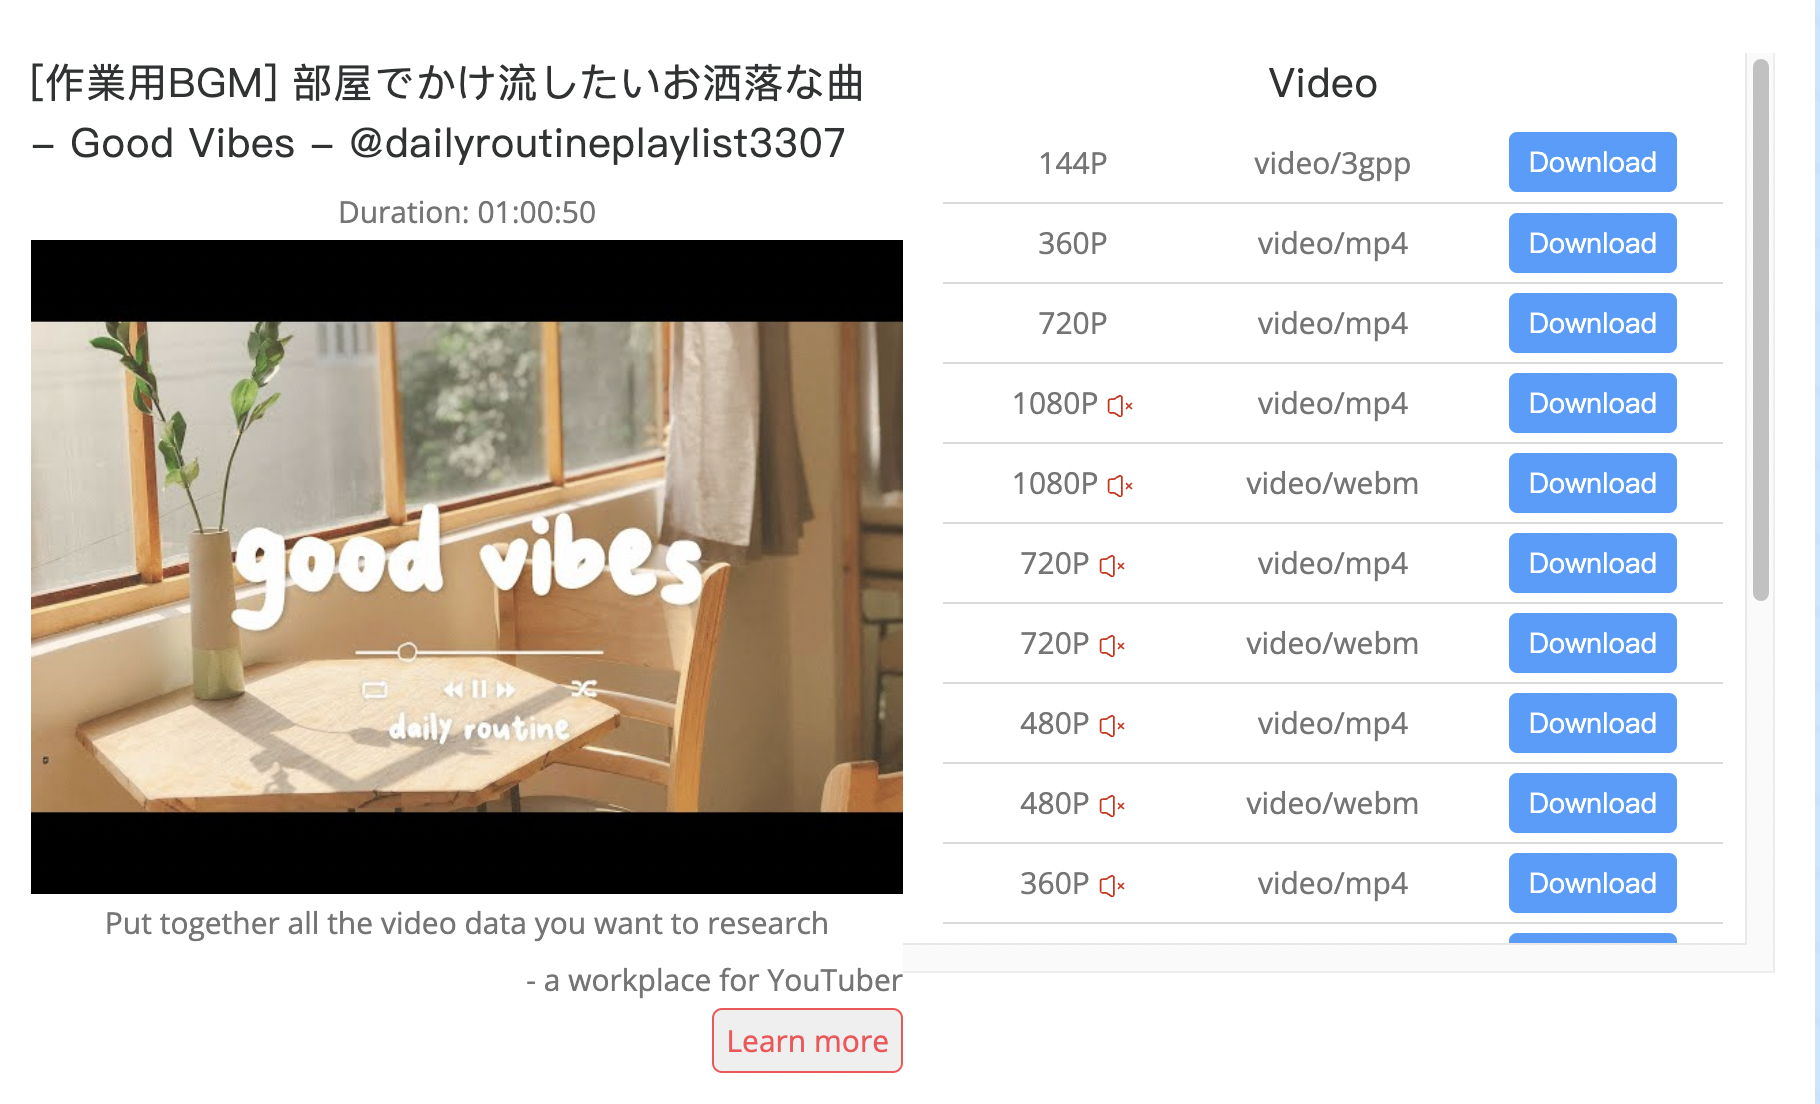 Choose to download the video/audio, and choose what quality to save the video. 